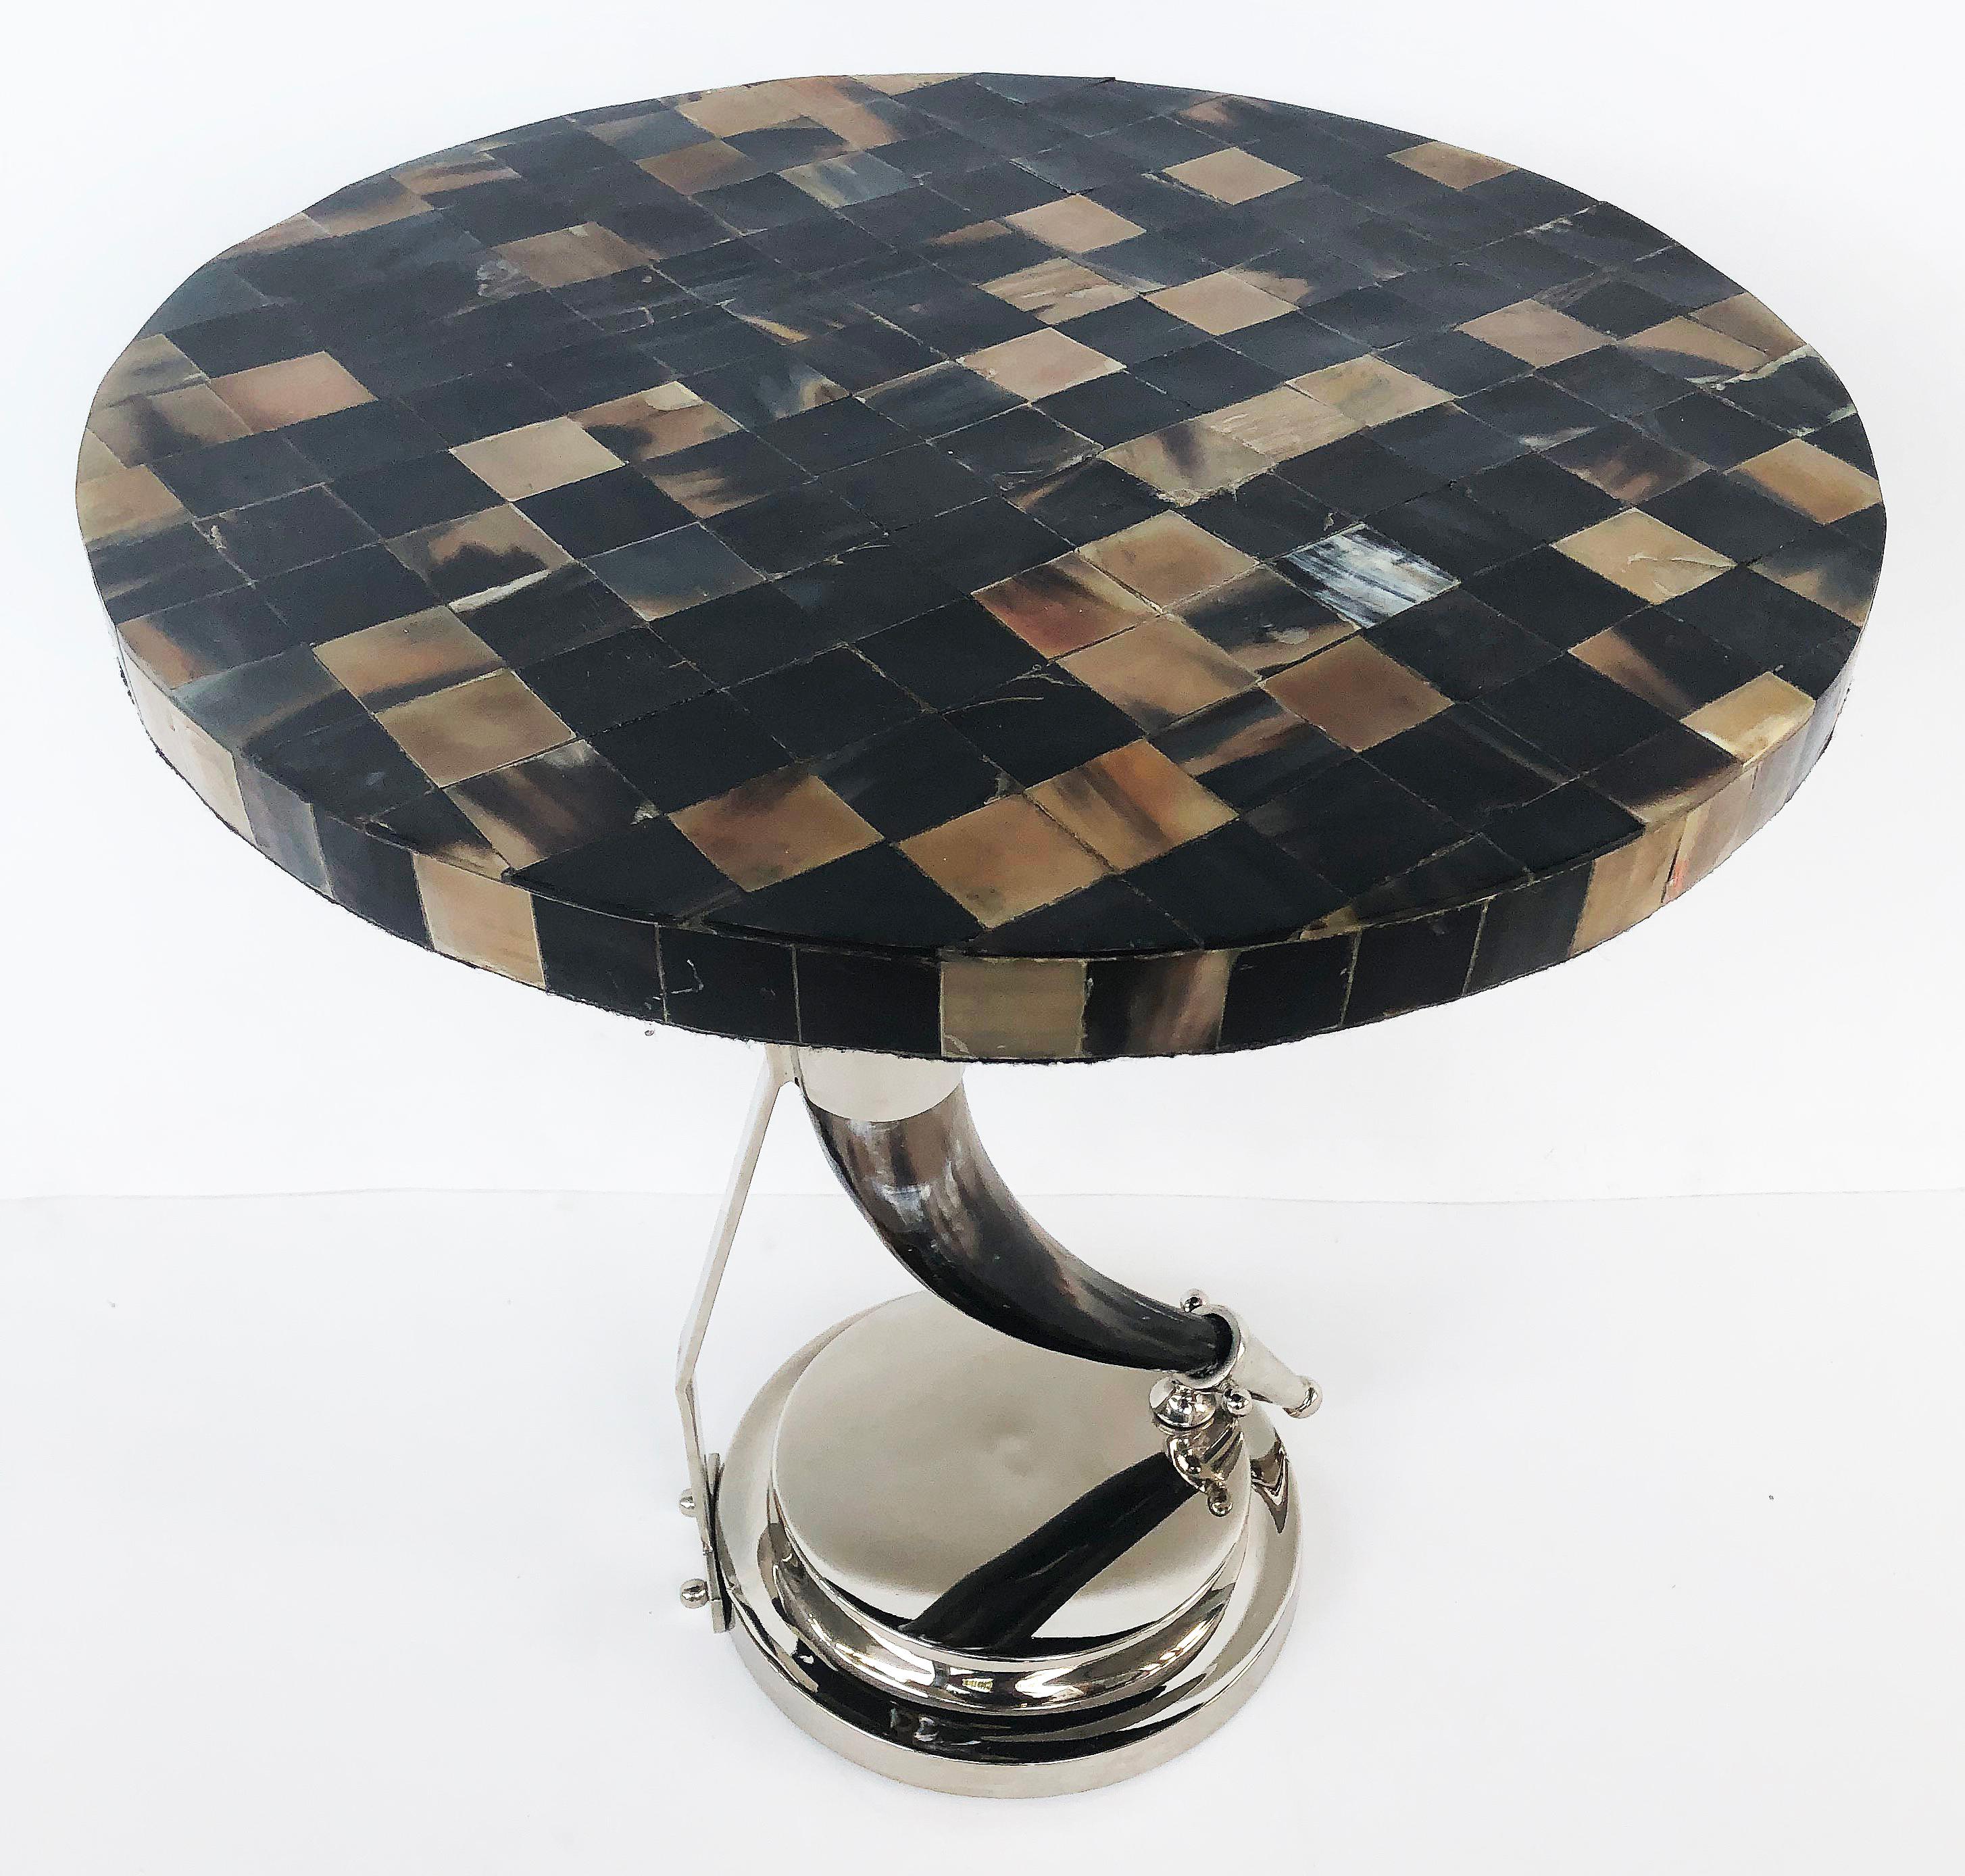 Vintage tessellated horn and chrome occasional table

Offered for sale is a tessellated horn topped occasional table supported by a polished steer horn and chrome base. This is a very stylish and unusual table that was custom-crafted.